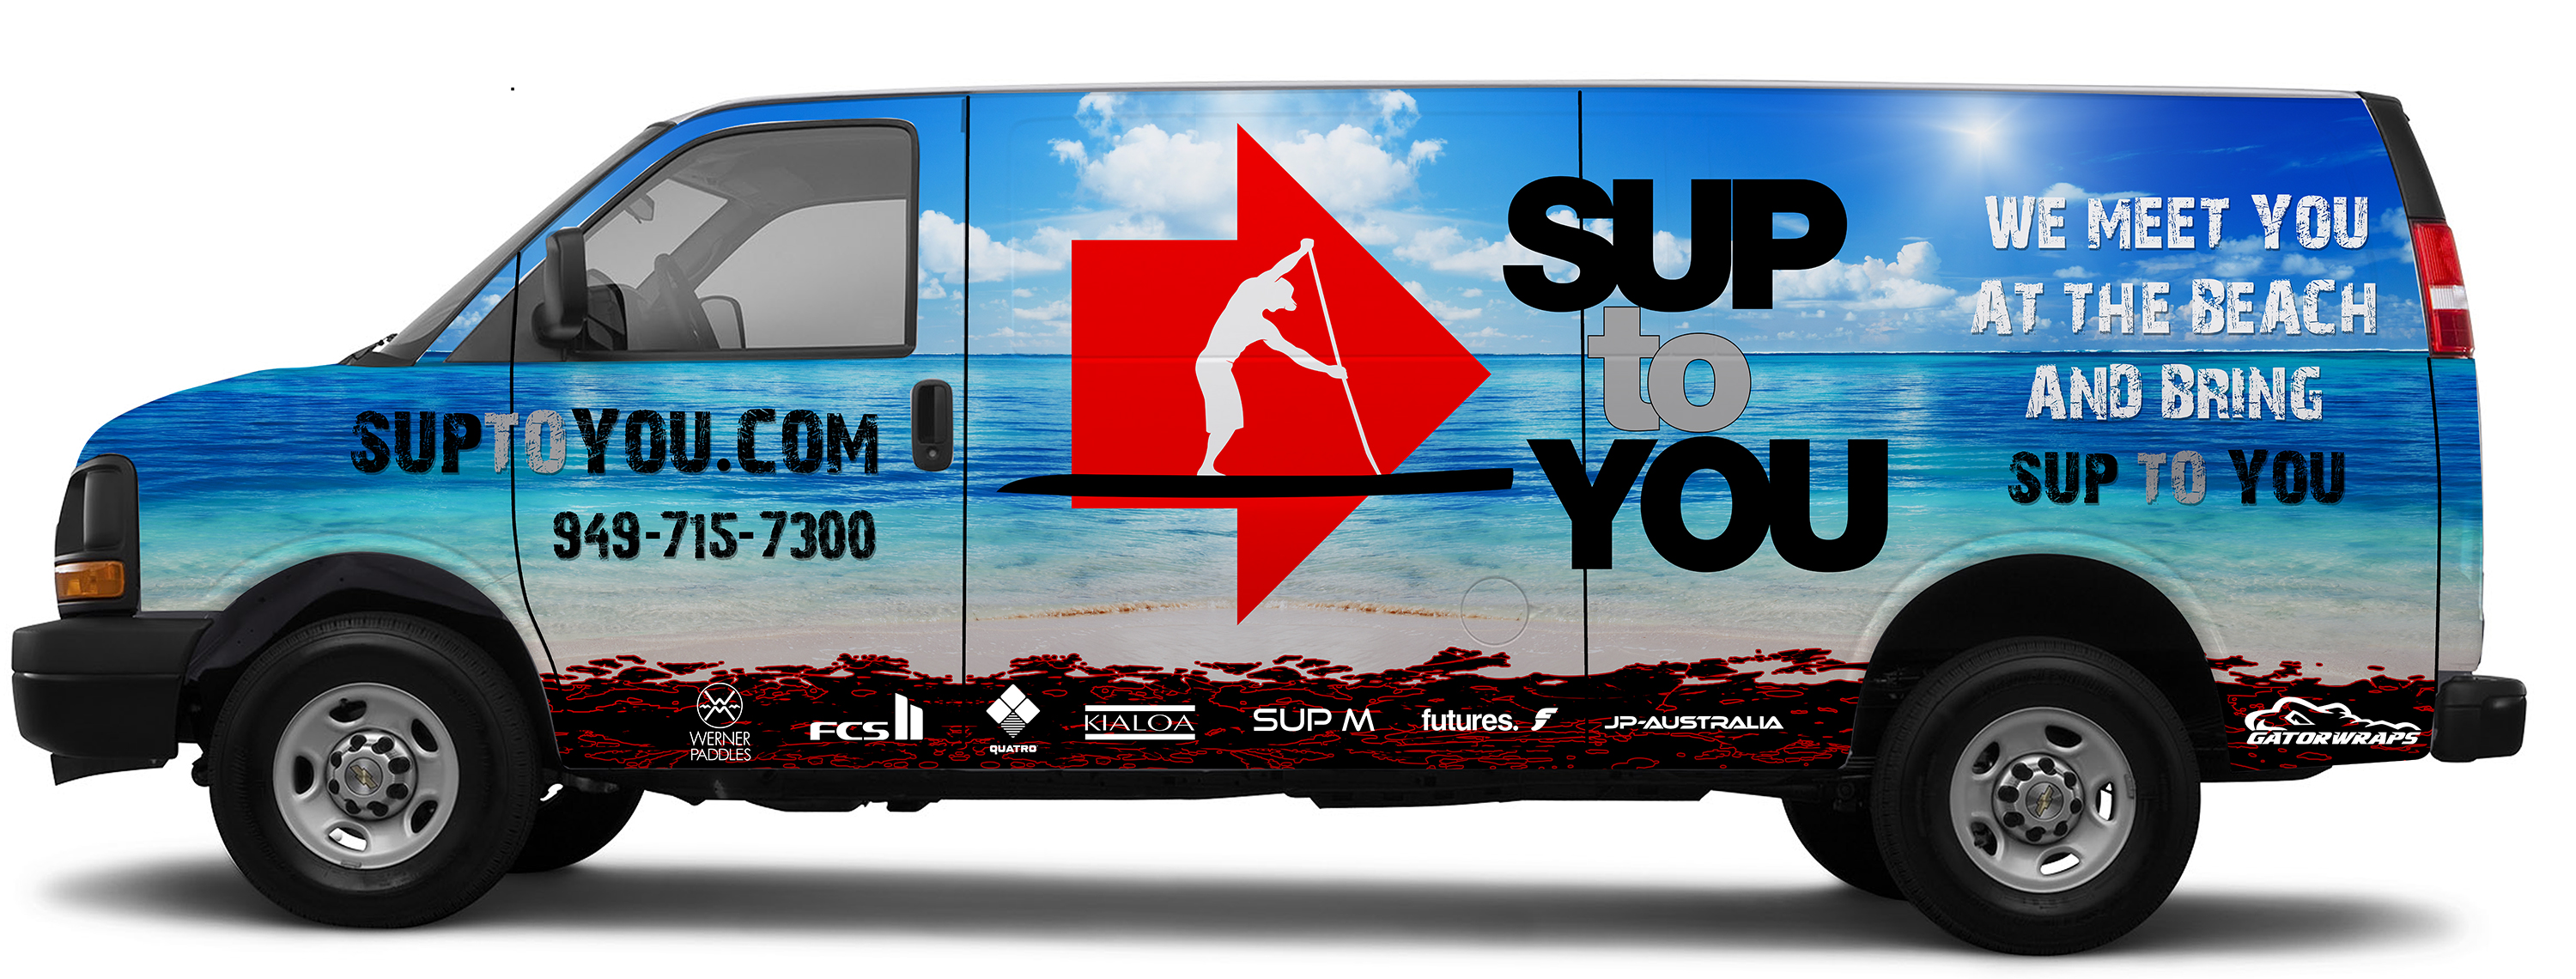 sup to you delivery van for sup rentals